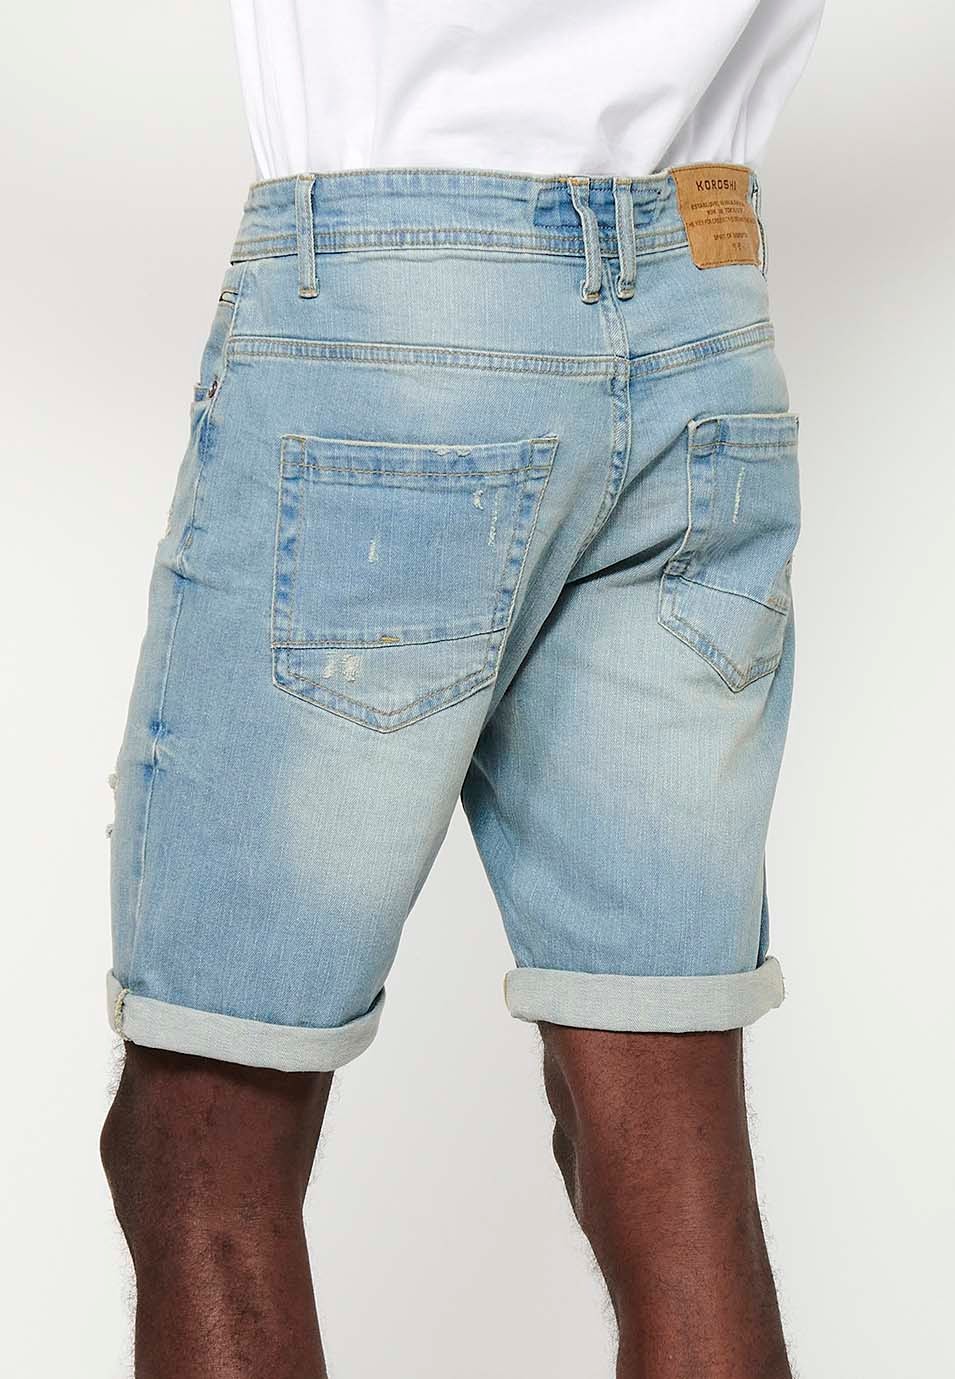 Shorts with turn-up finish and front closure with zipper and button and five pockets, one blue pocket pocket for men 1